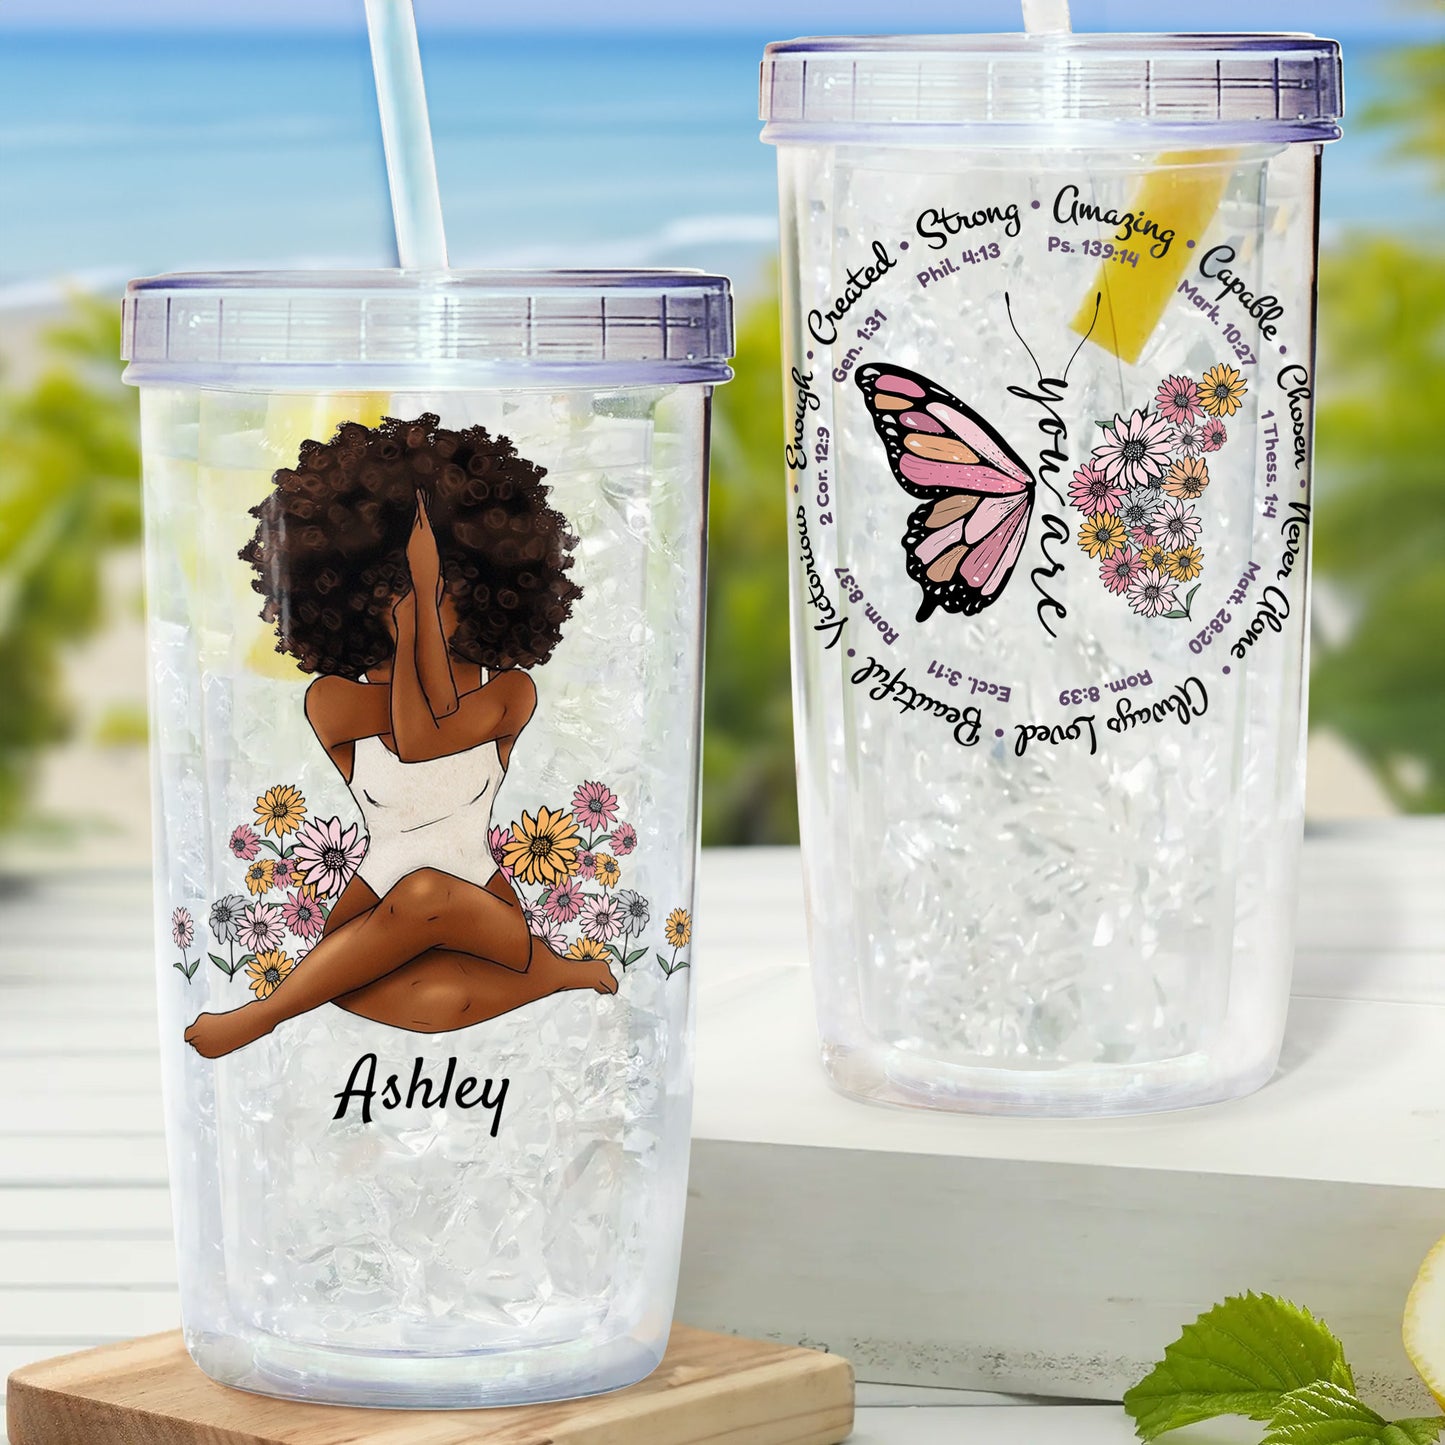 Personalized Reusable Drink Cup with Name - Insulated Acrylic